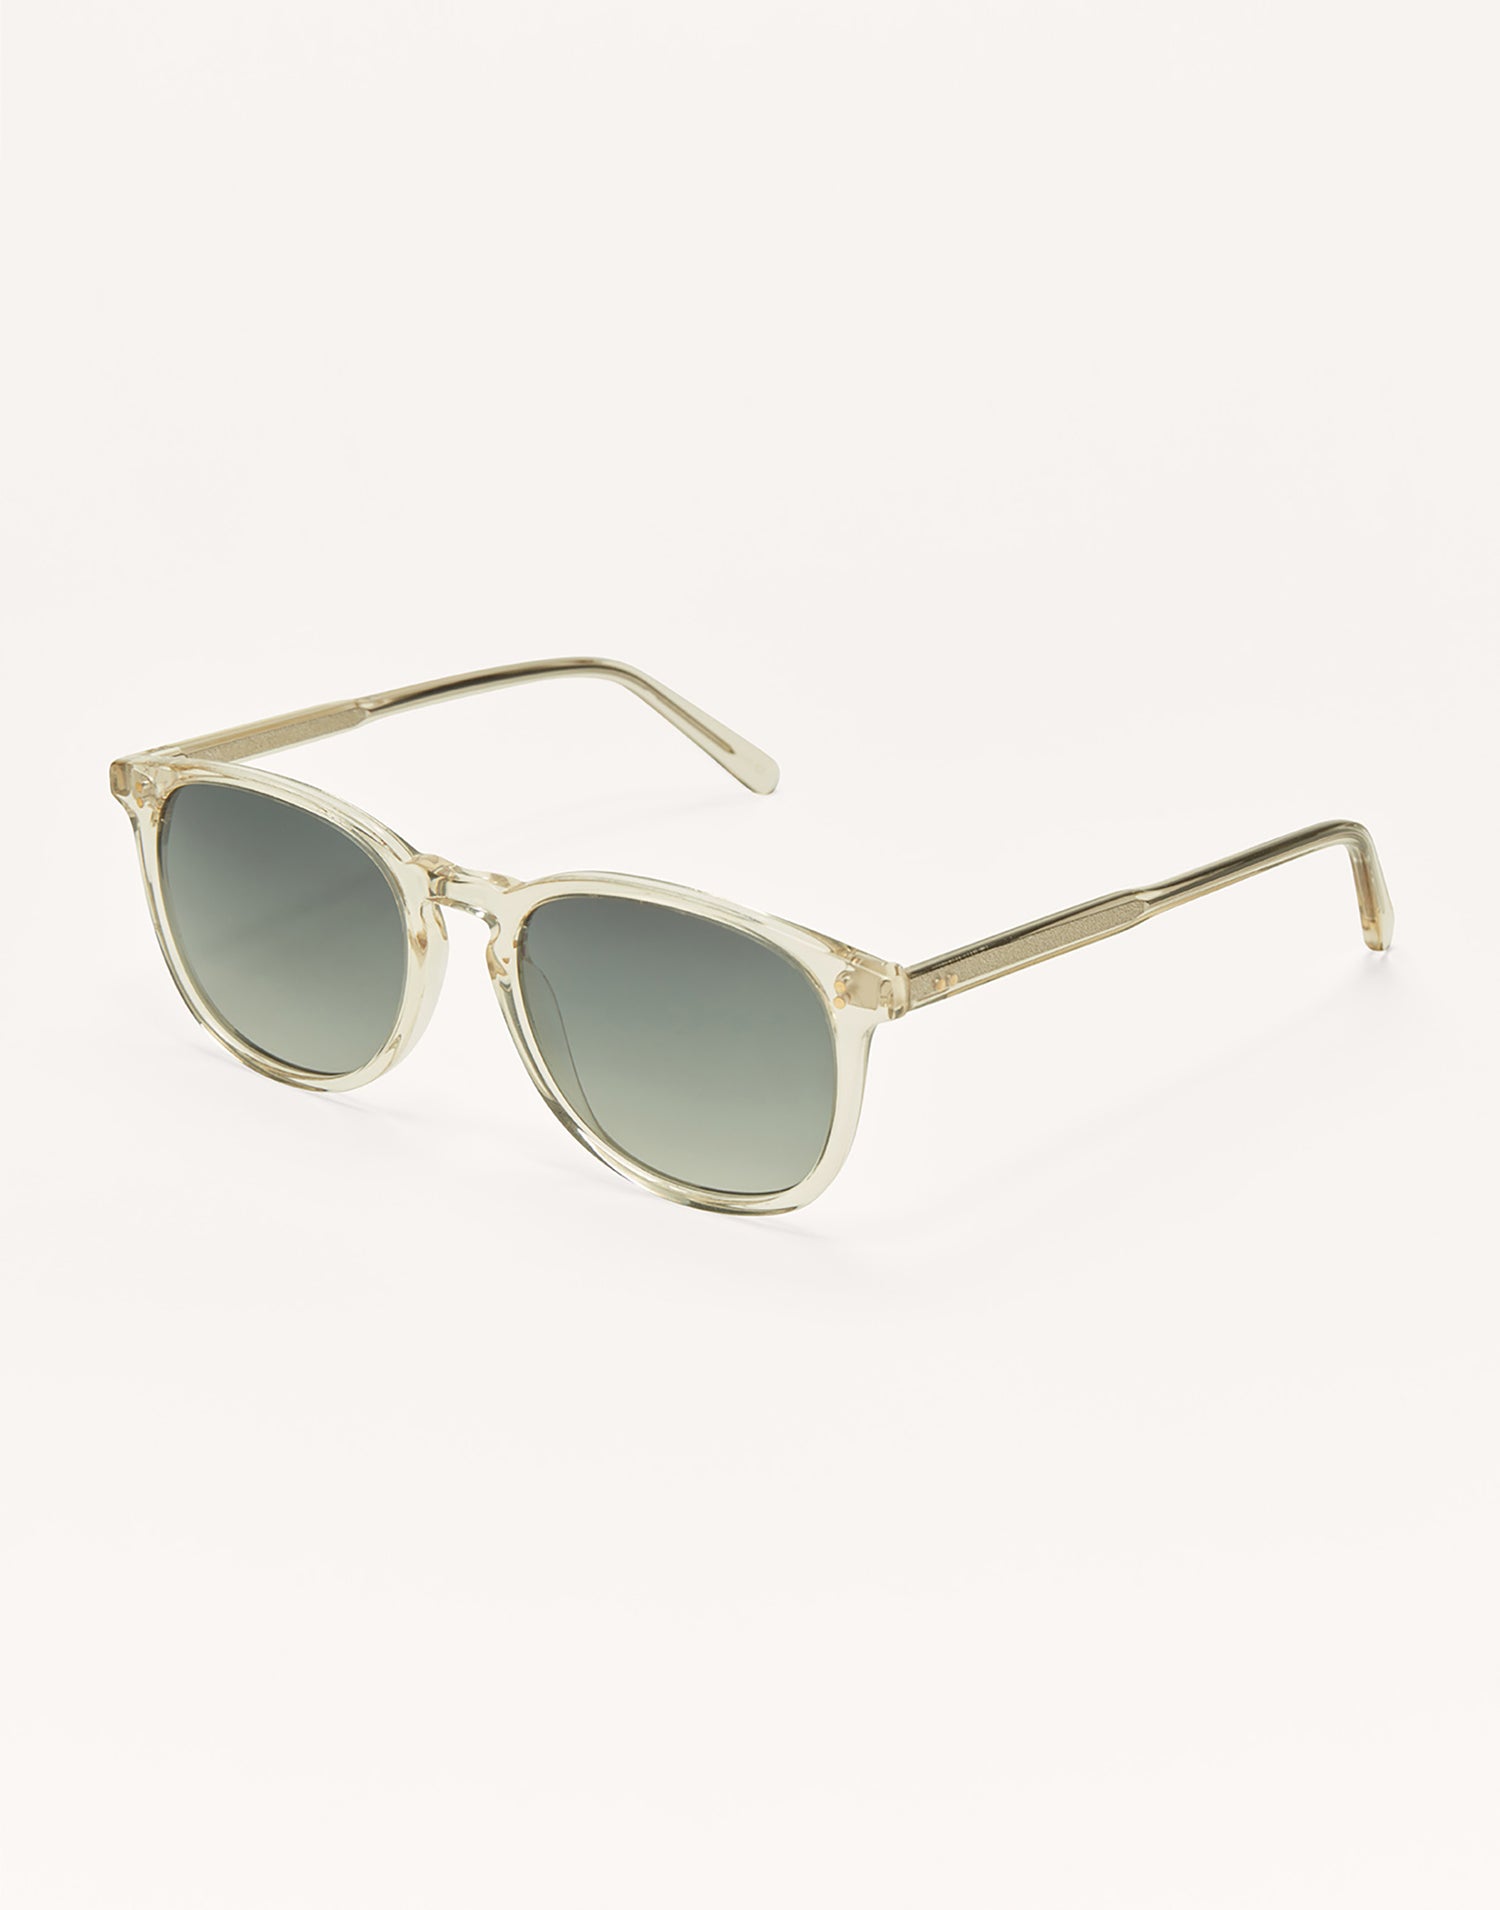 The Essential Sunglasses by Z Supply in Champagne - Angled View